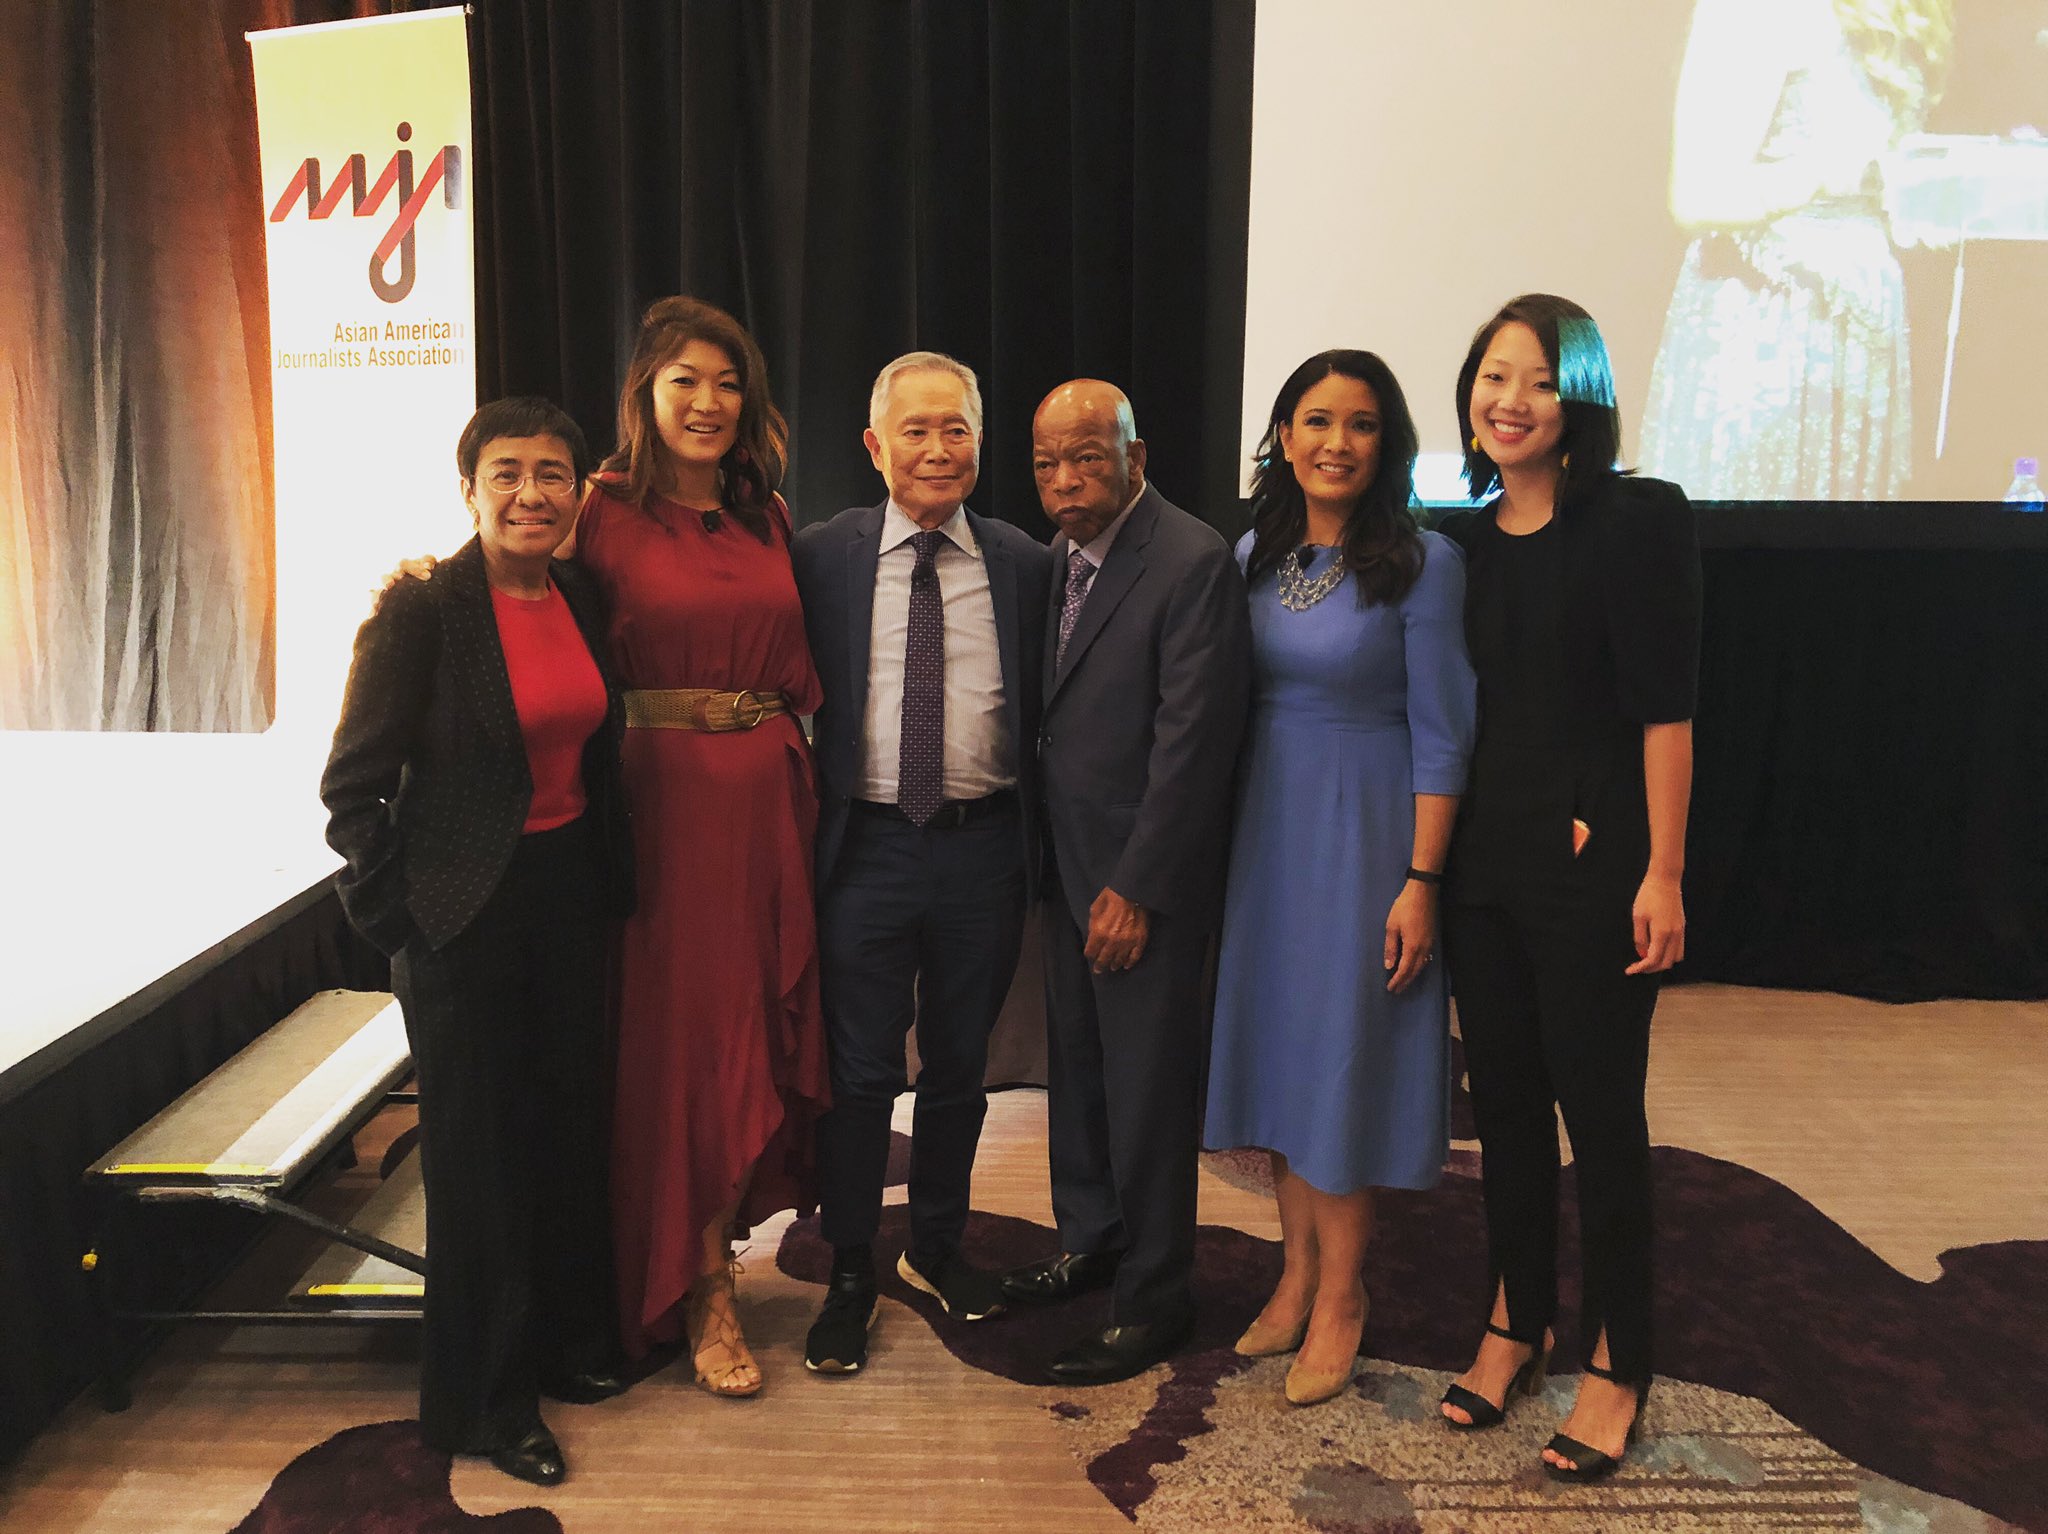 Maria Ressa at the AAJA 2019 Convention in Atlanta, Georgia, standing with from left to right, Juju Chang, George Takei, the late Congressman John Lewis, Elaine Quijano, and Michelle Ye Hee Lee.